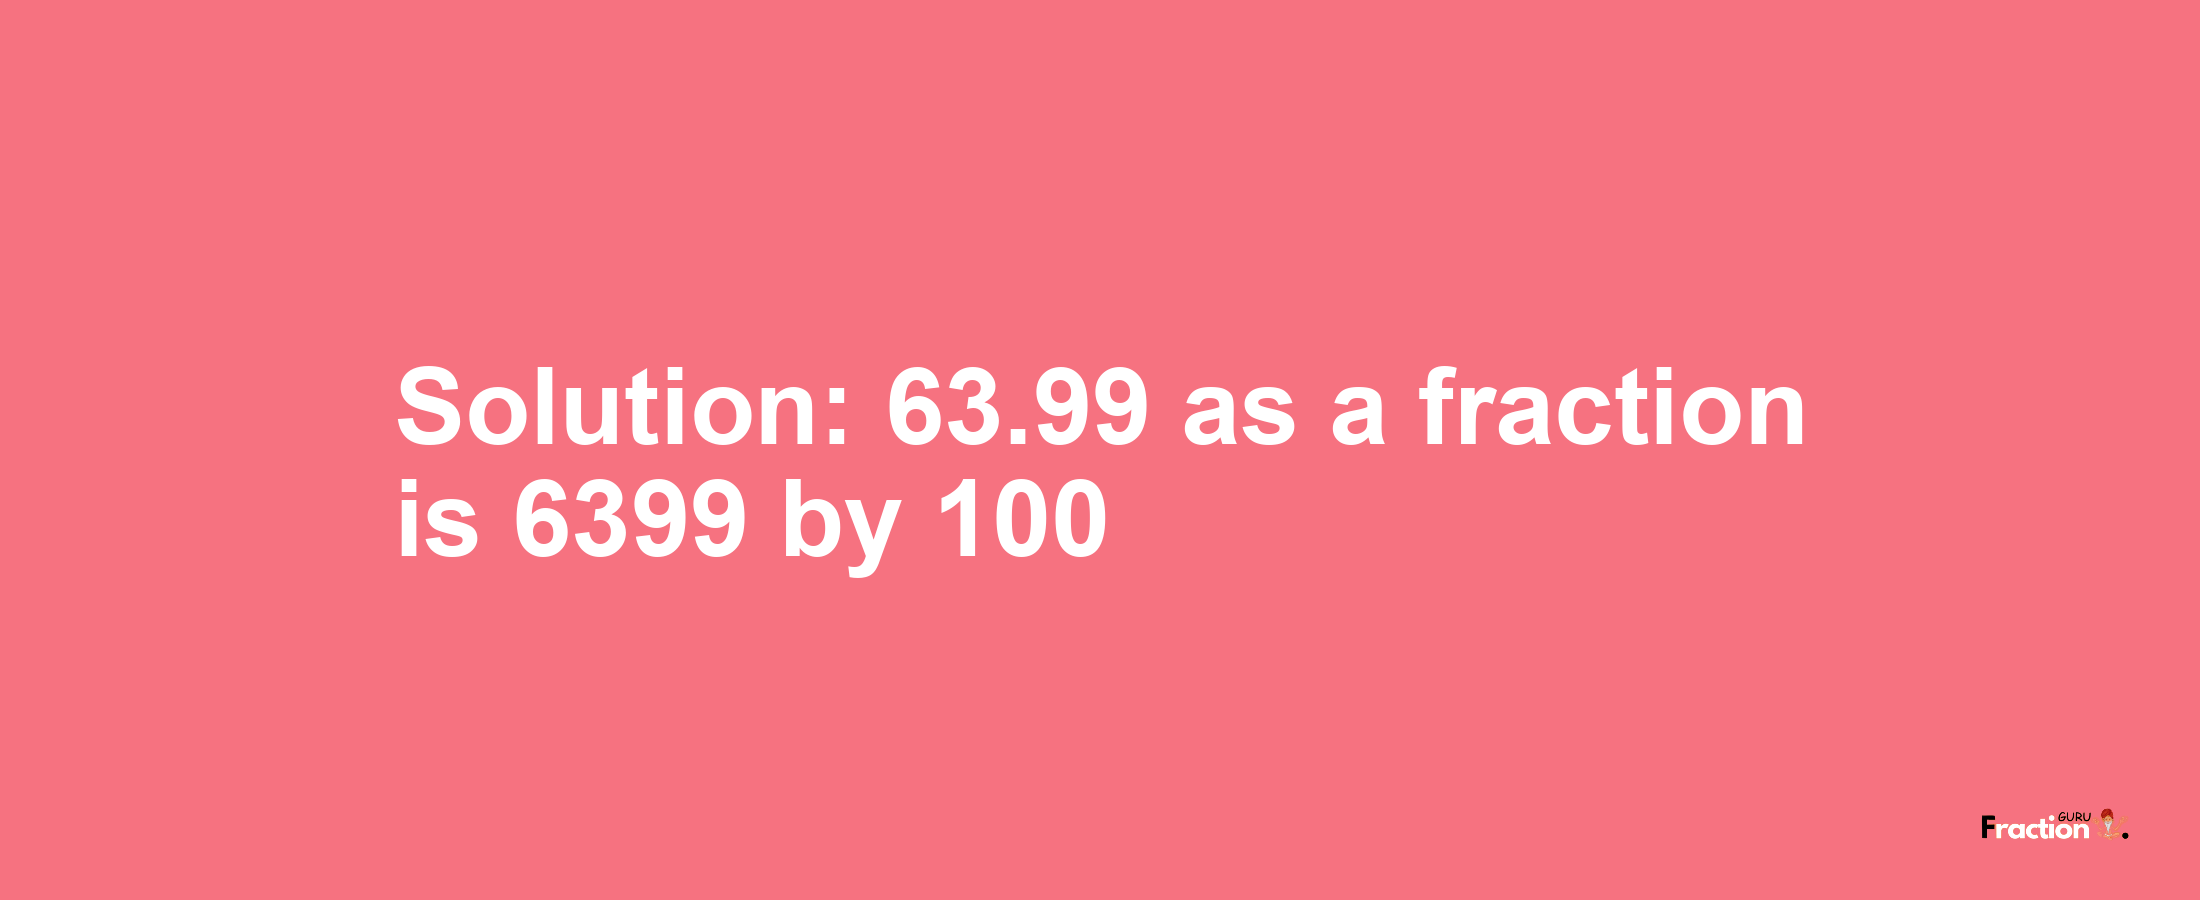 Solution:63.99 as a fraction is 6399/100